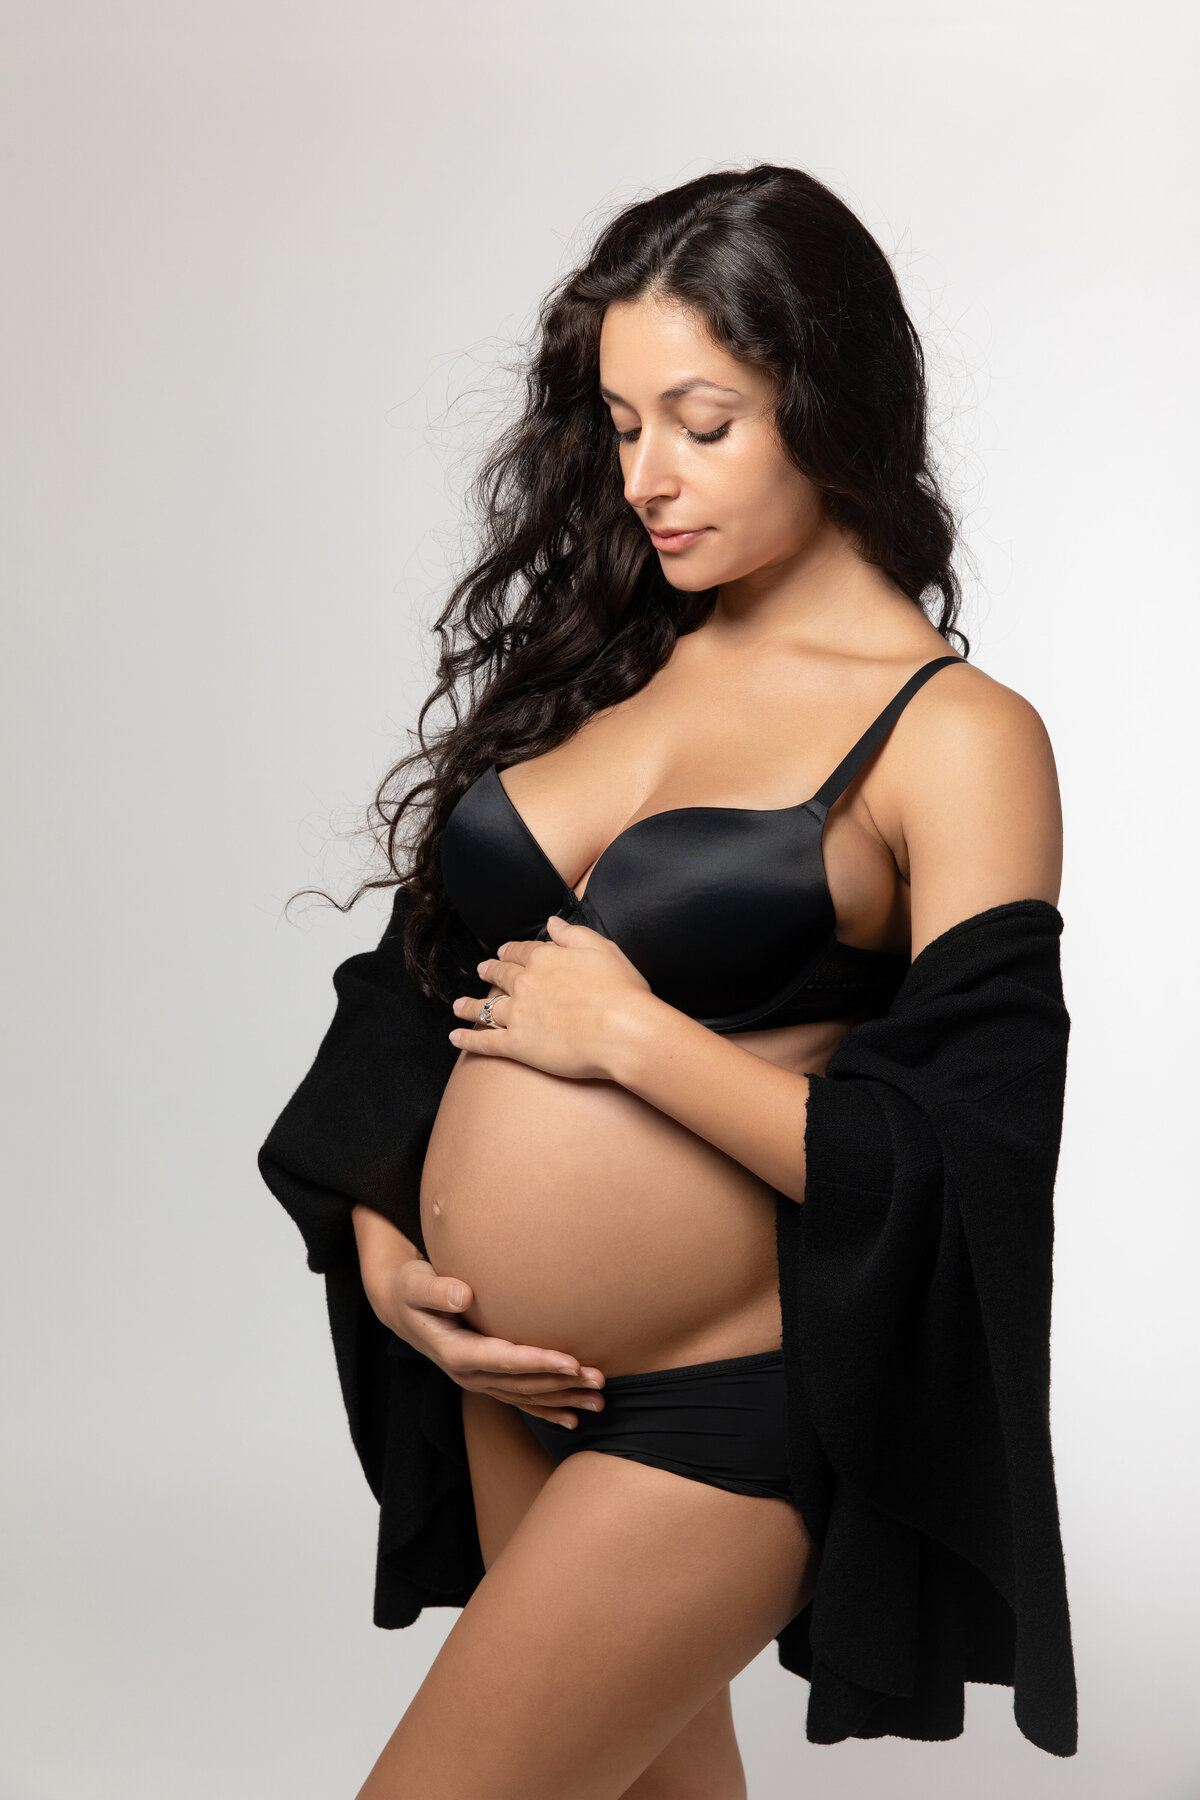 pregnant woman maternity session